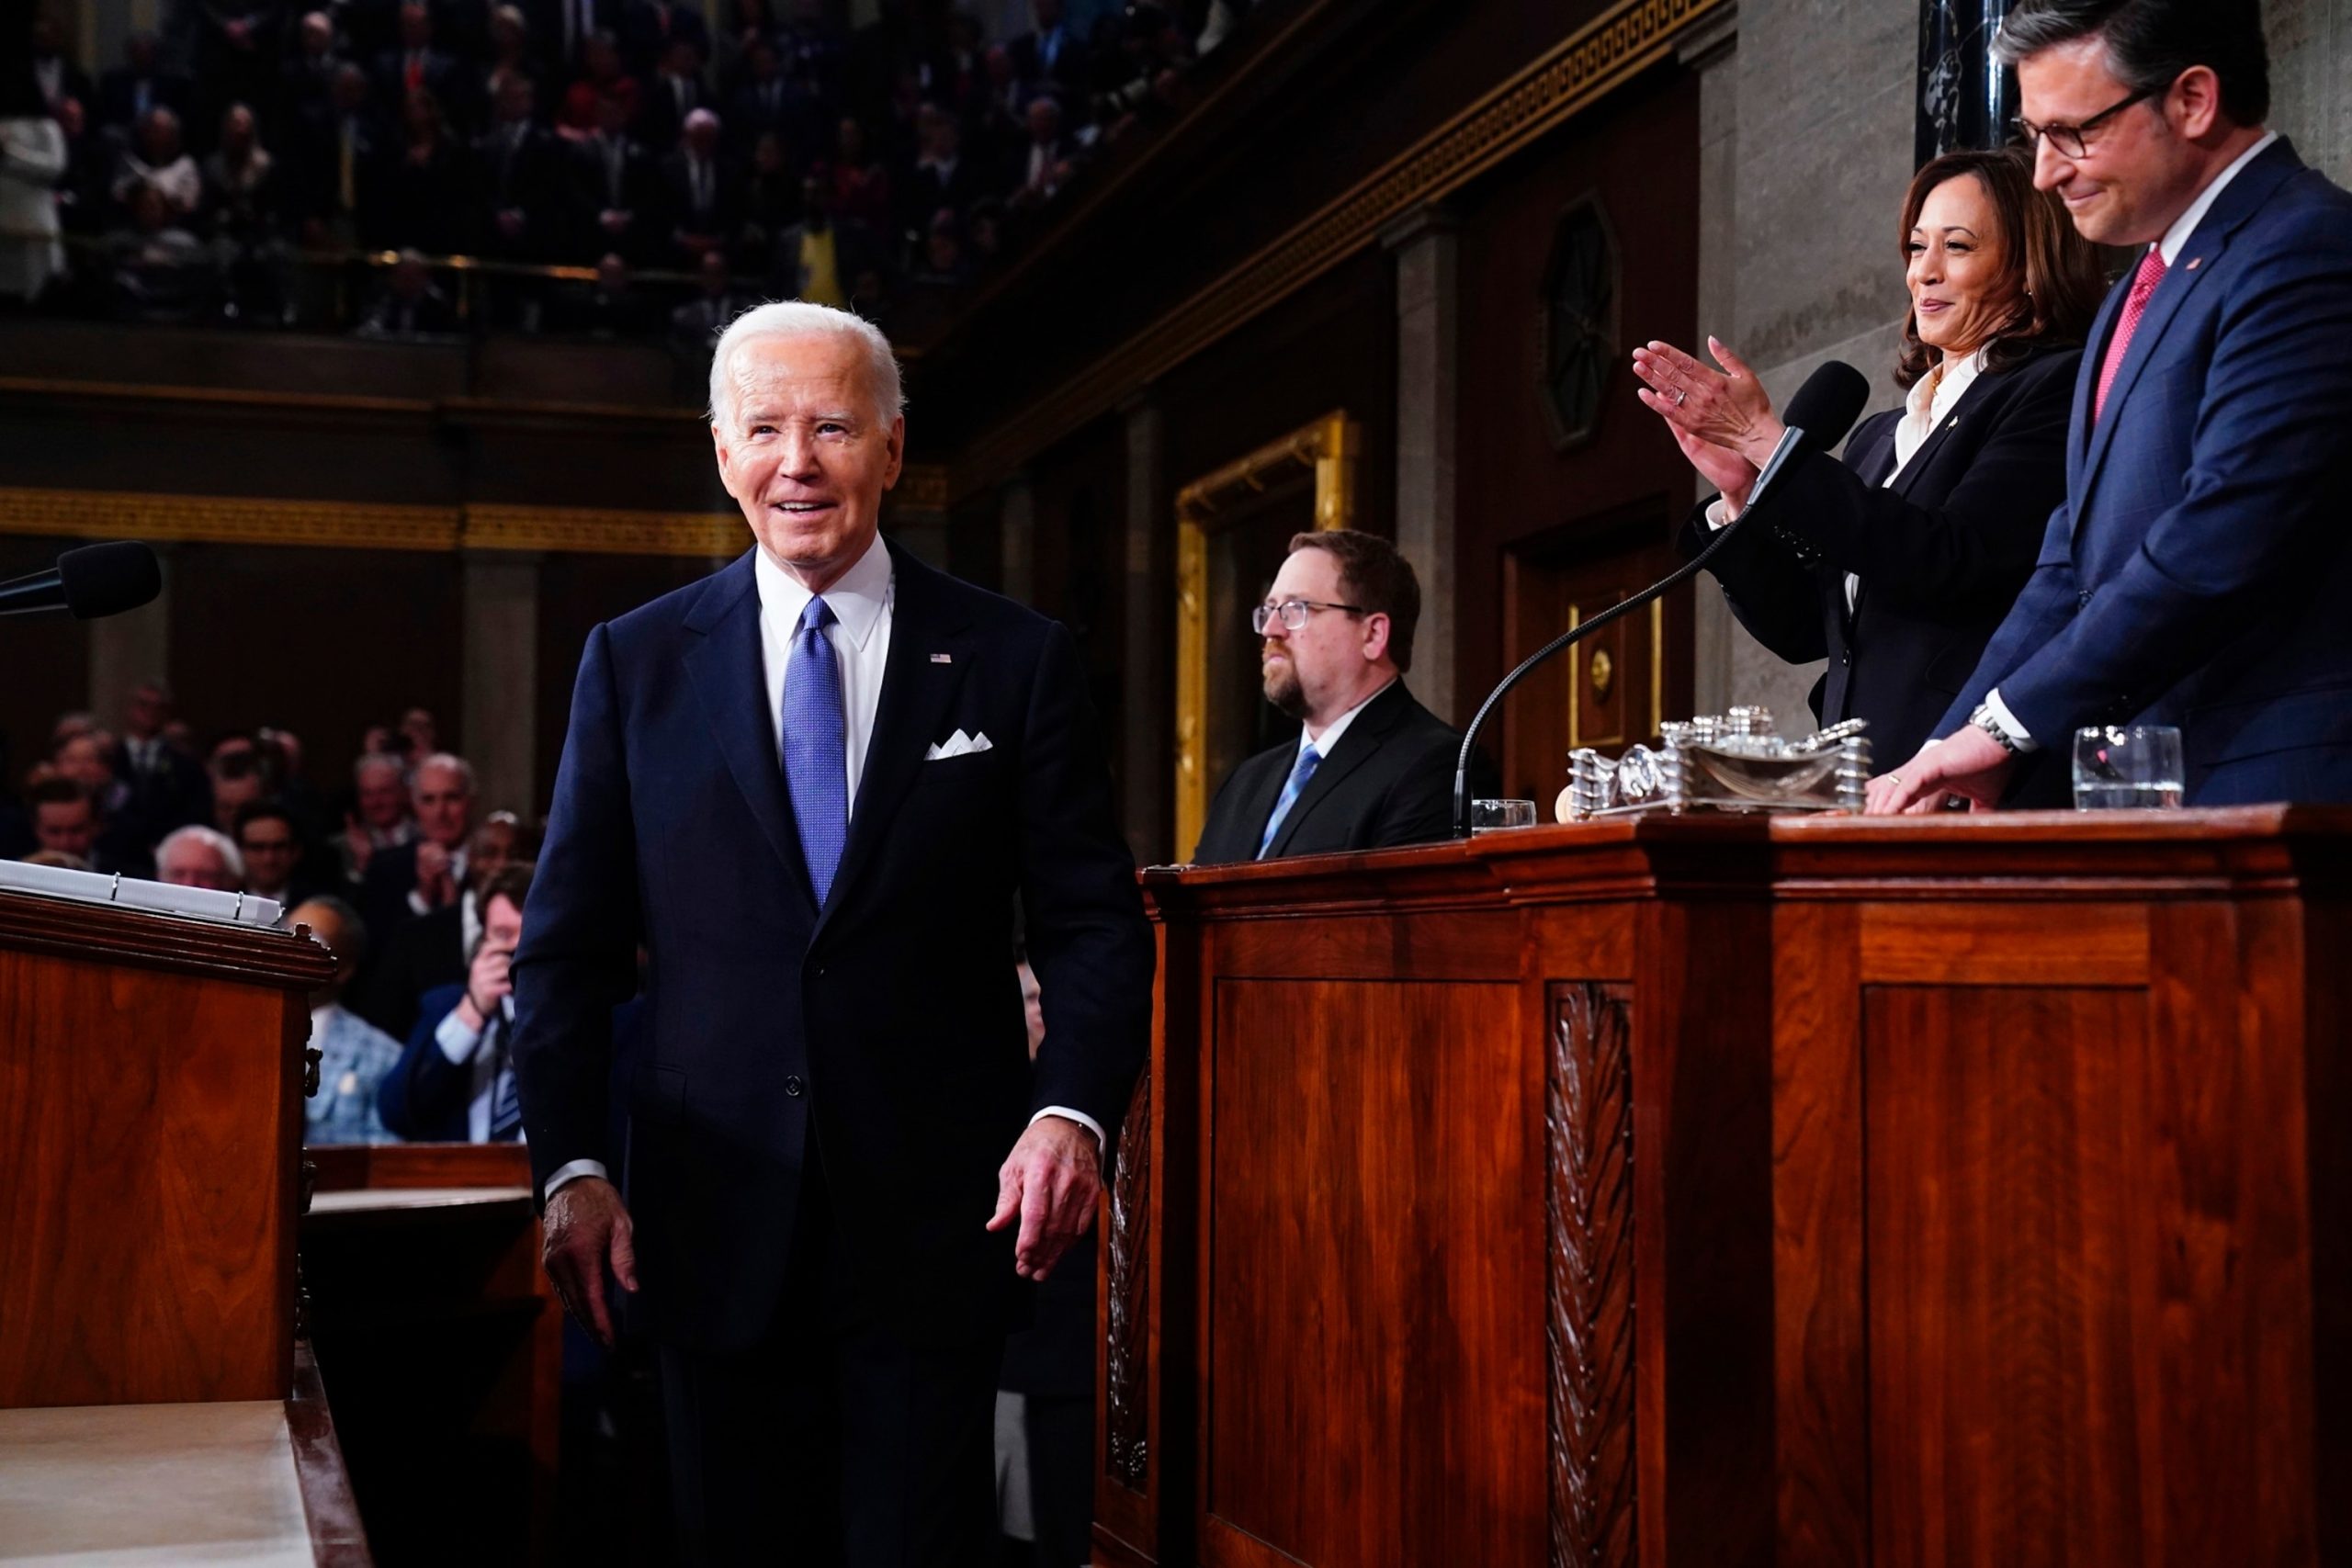 Analysis of Biden's State of the Union Address: Confronting Trump and Addressing Age Questions